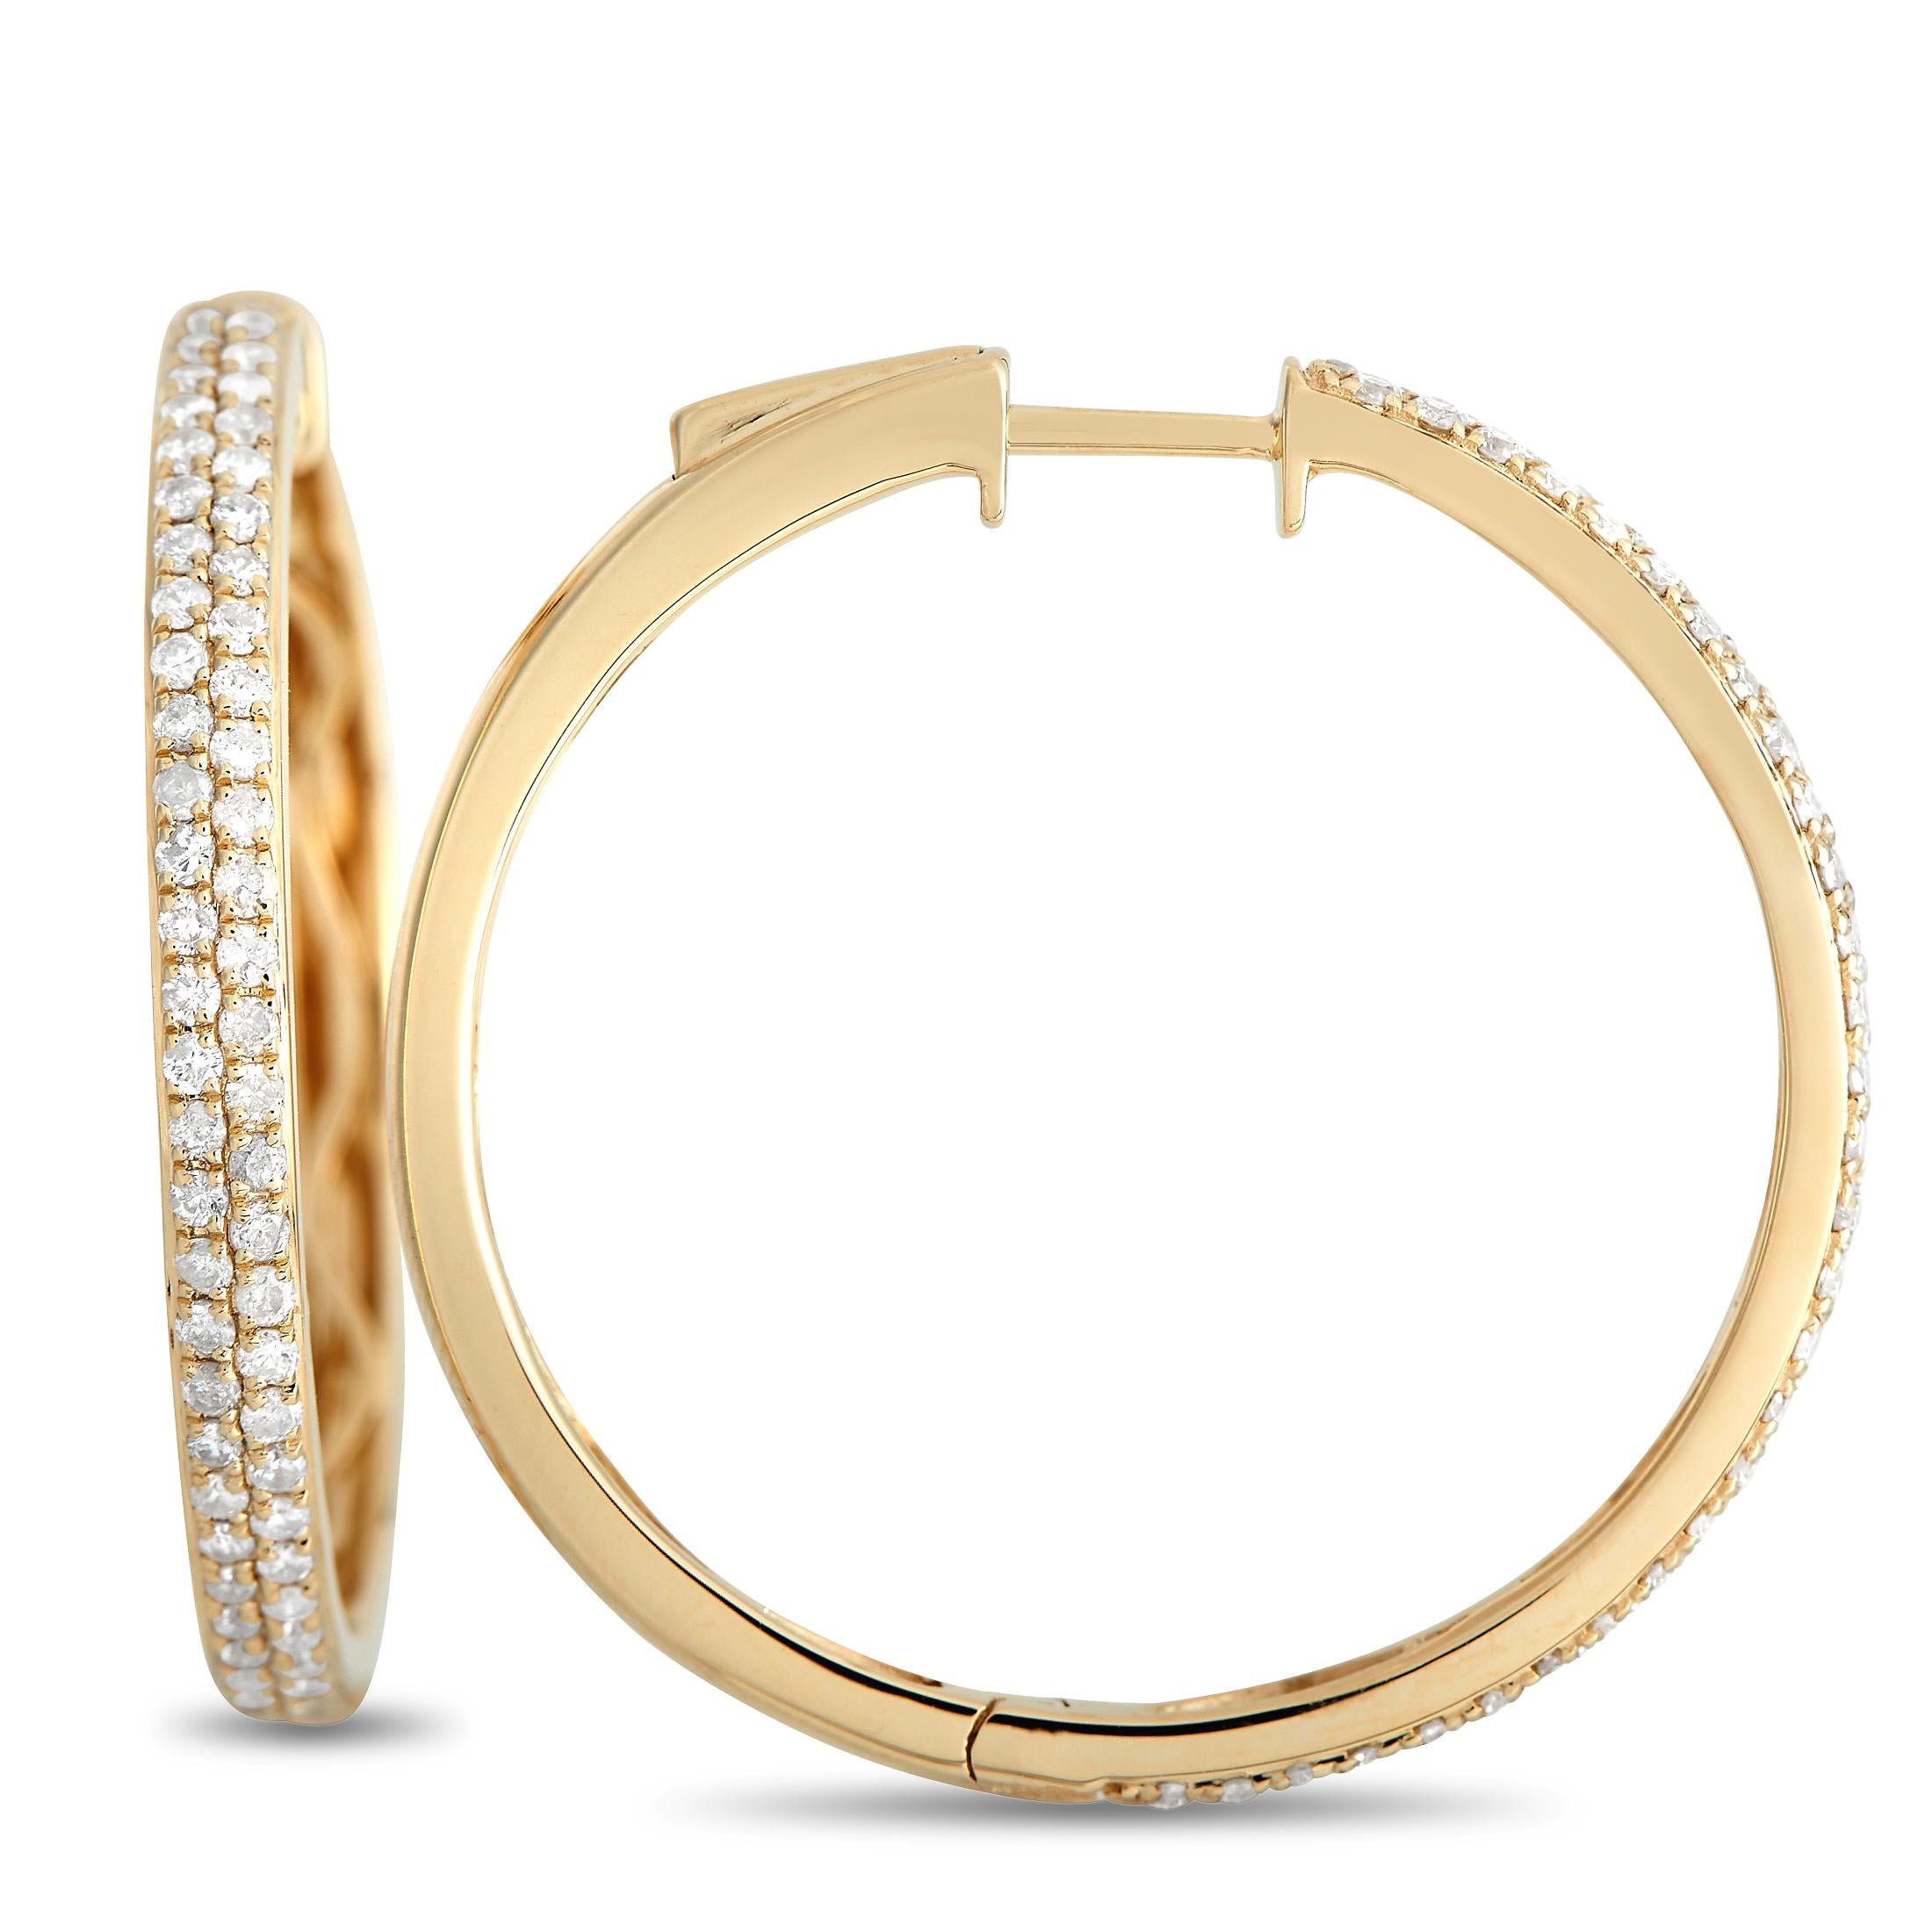 Diamonds with a total weight of 1.0 carats allow these hoop earrings to sparkle and shine along with every move you make. Classic and elegant, each one features a detailed 14K Yellow Gold setting that measures 1.15” round. 
 
This jewelry piece is